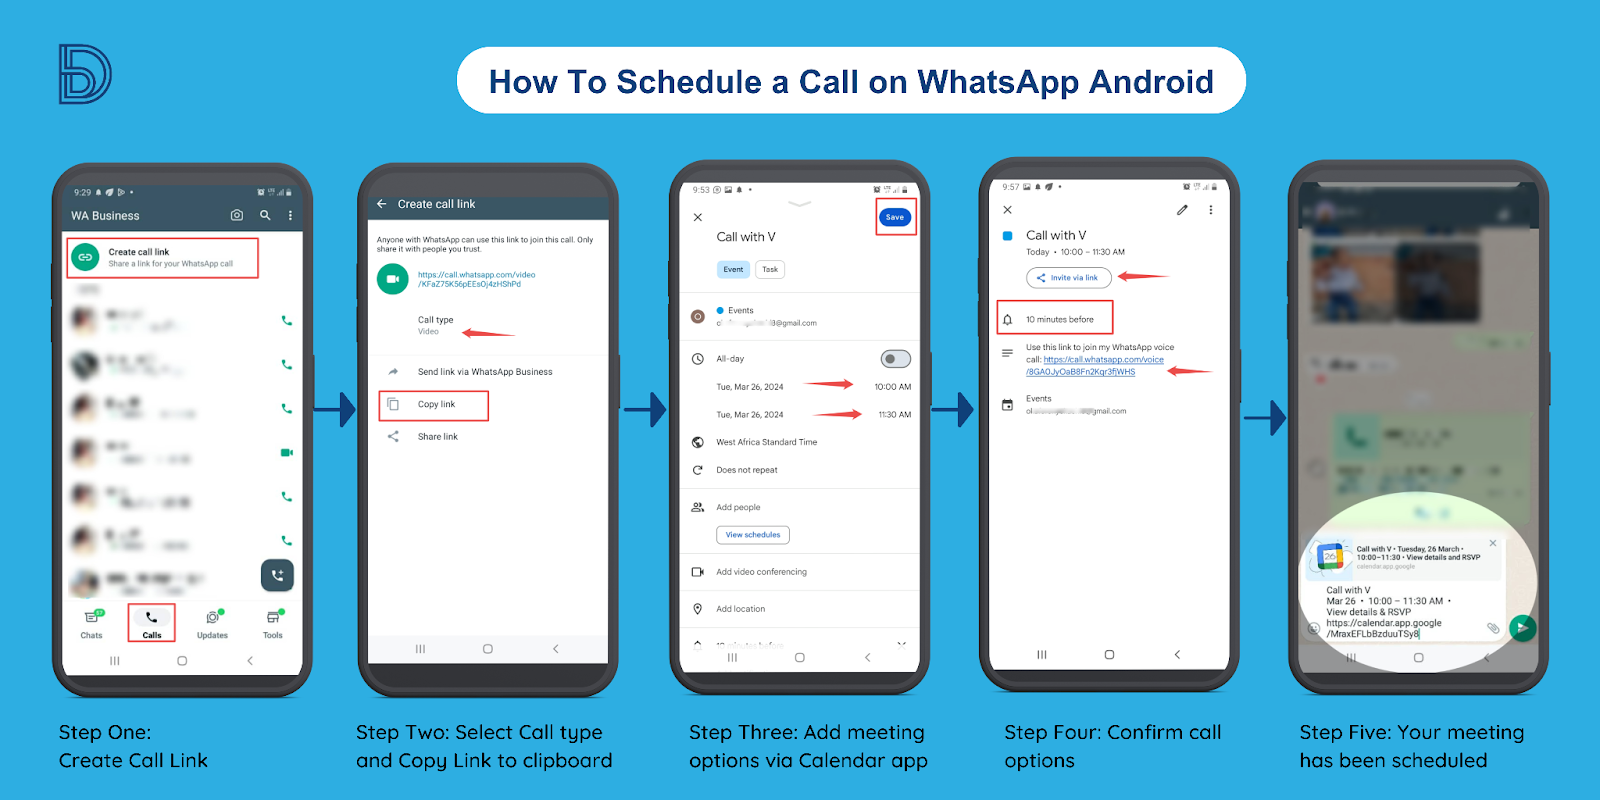 Guide: How to schedule a call on WhatsApp